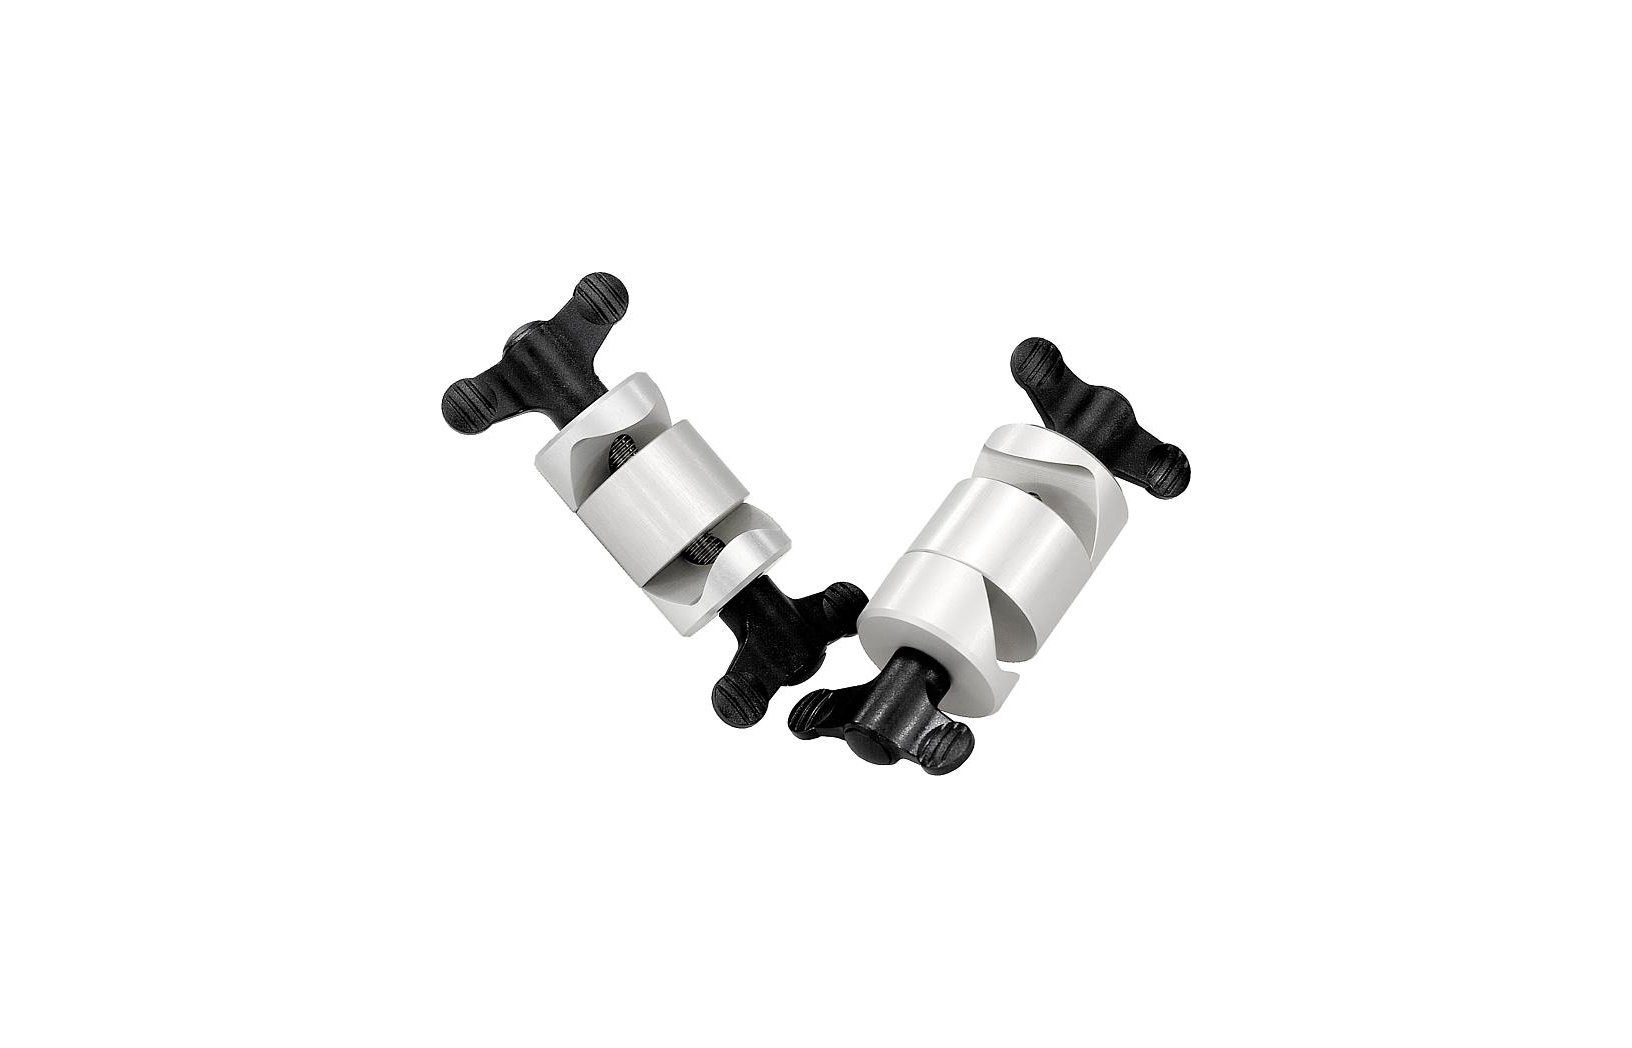 K0134 Clamping joints individually adjustable